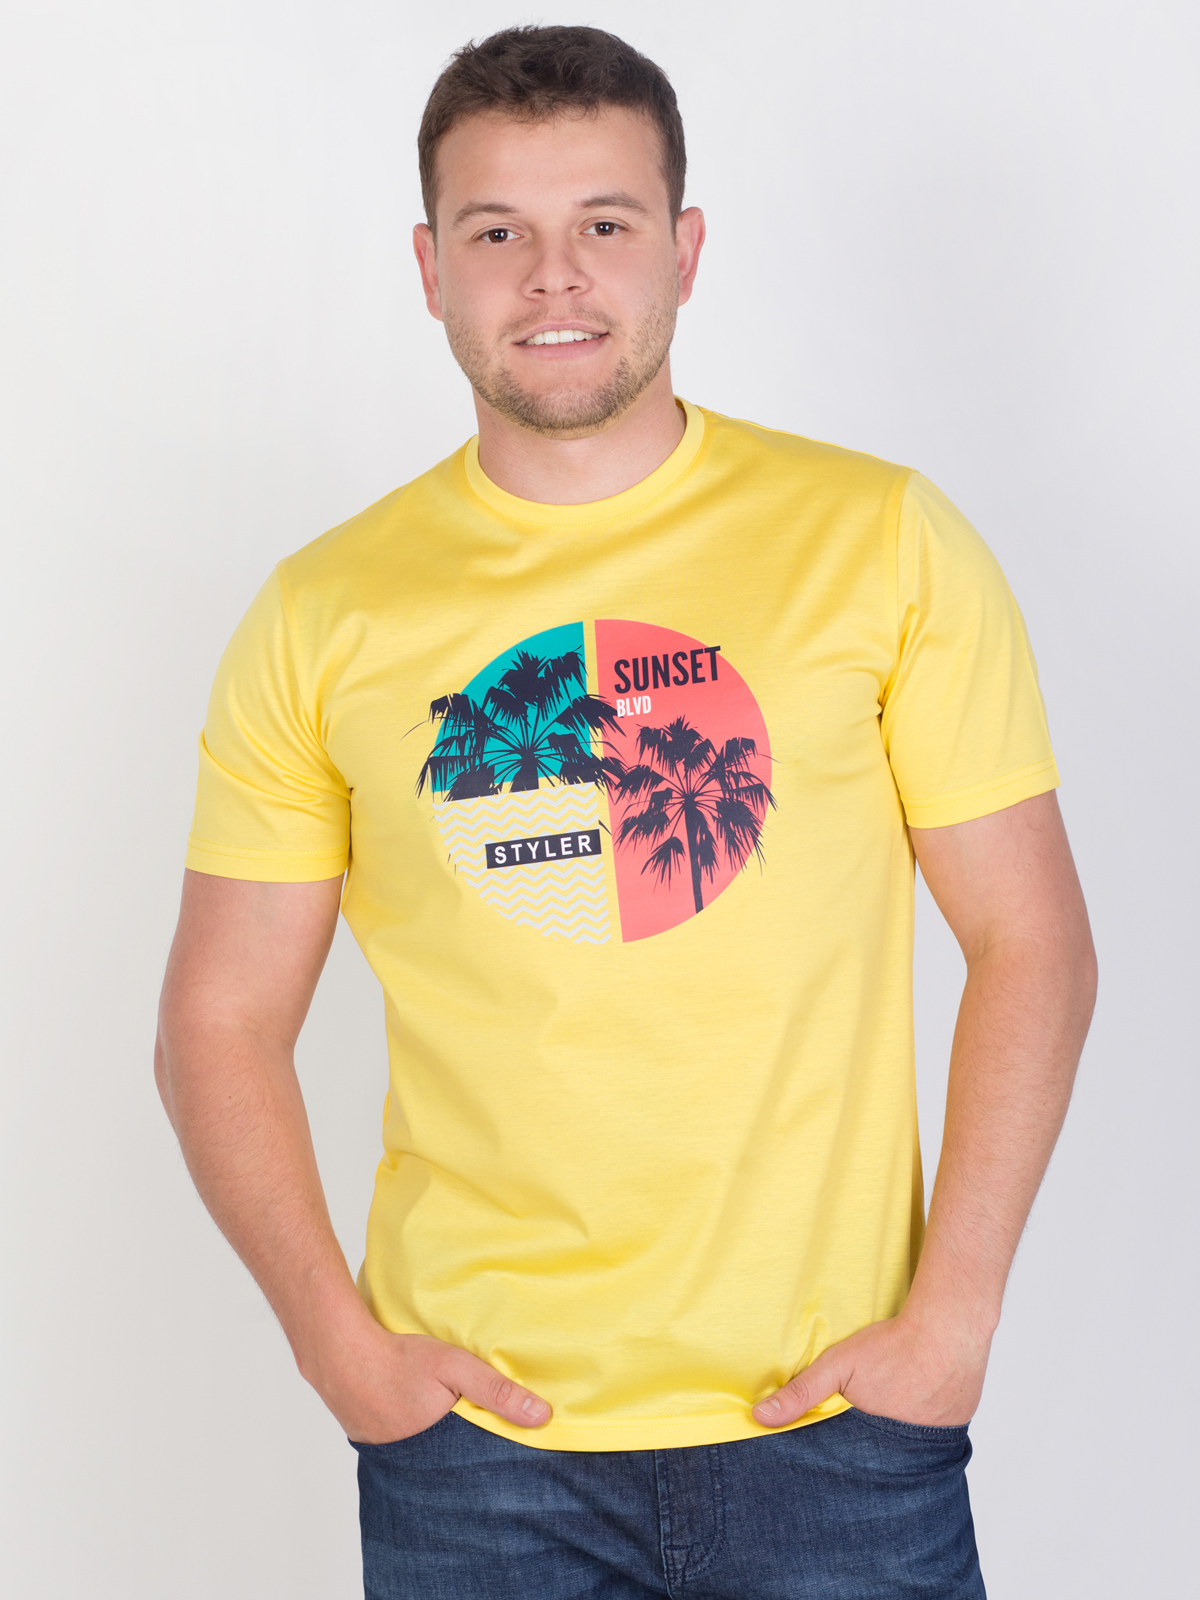 Tshirt in yellow made of mercerized cot - 96431 € 16.31 img3